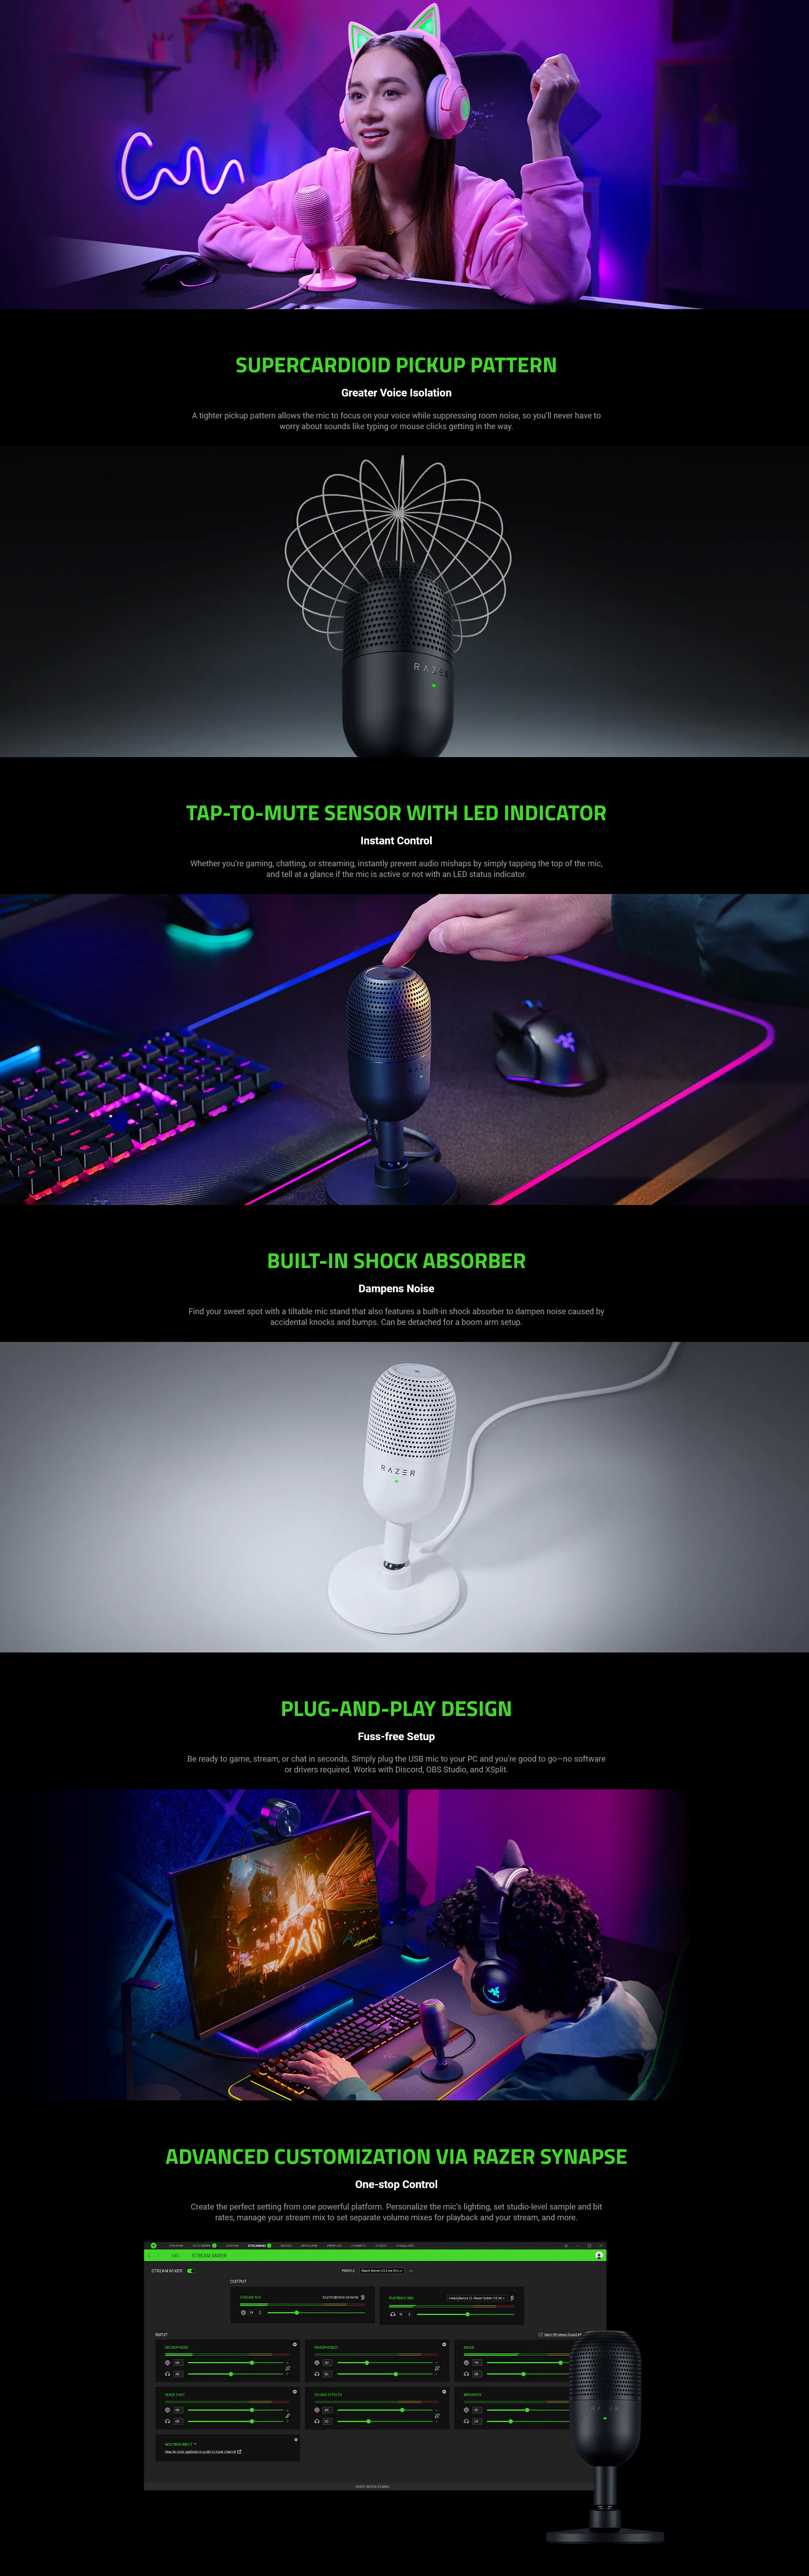 A large marketing image providing additional information about the product Razer Seiren V3 Mini - Ultra-Compact USB Microphone (White) - Additional alt info not provided